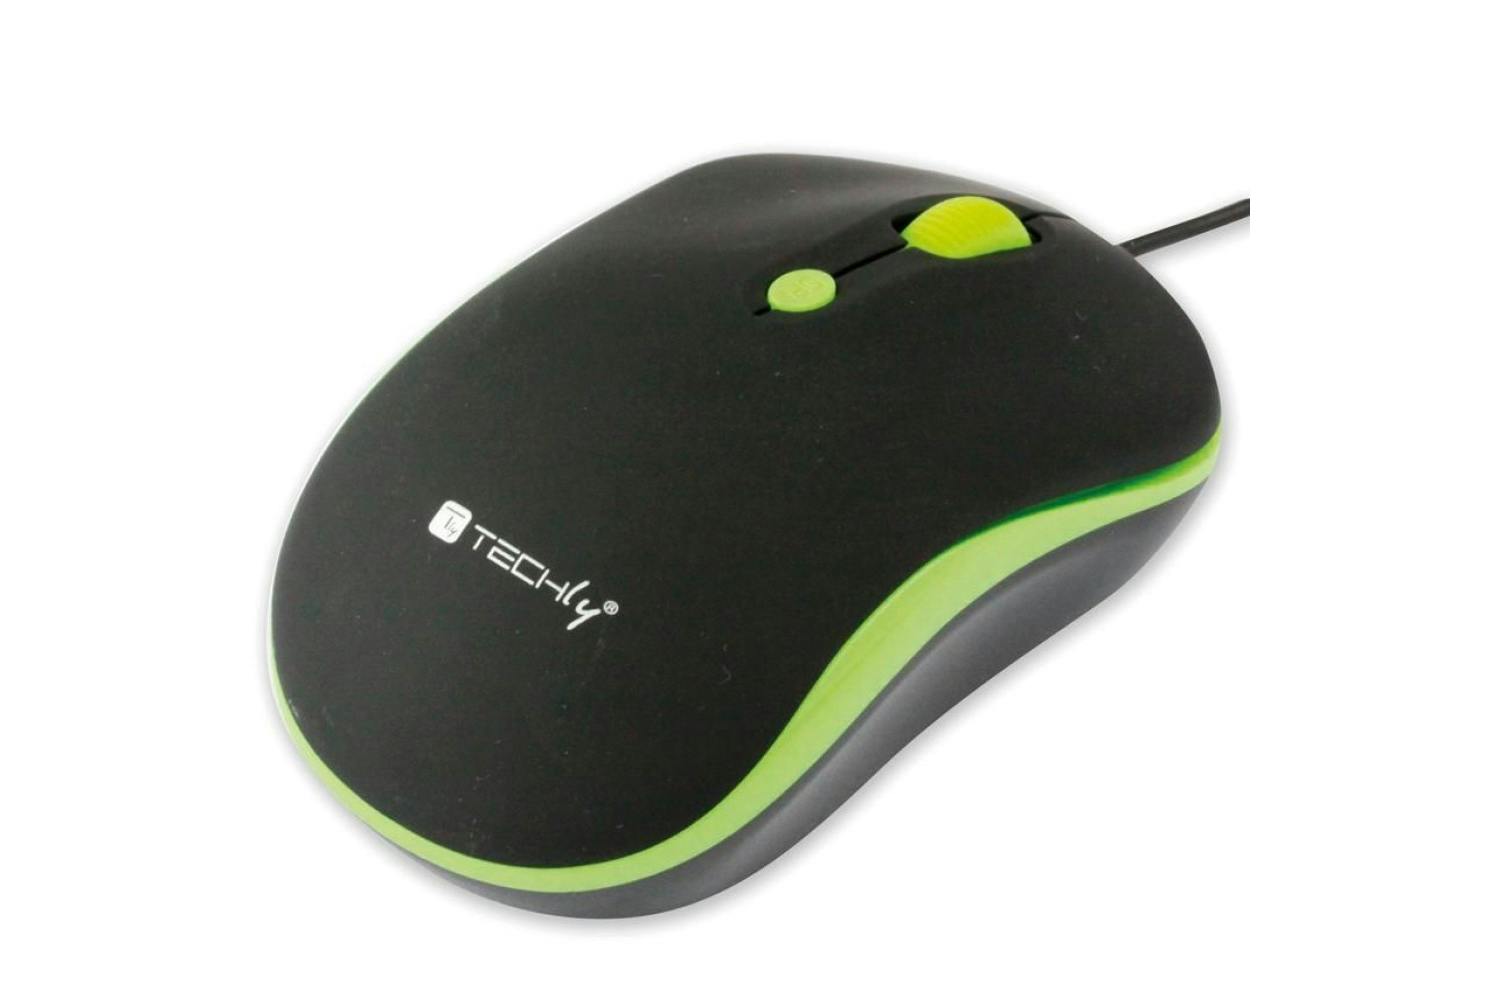 Techly Wired Optical USB Mouse | Black/Green